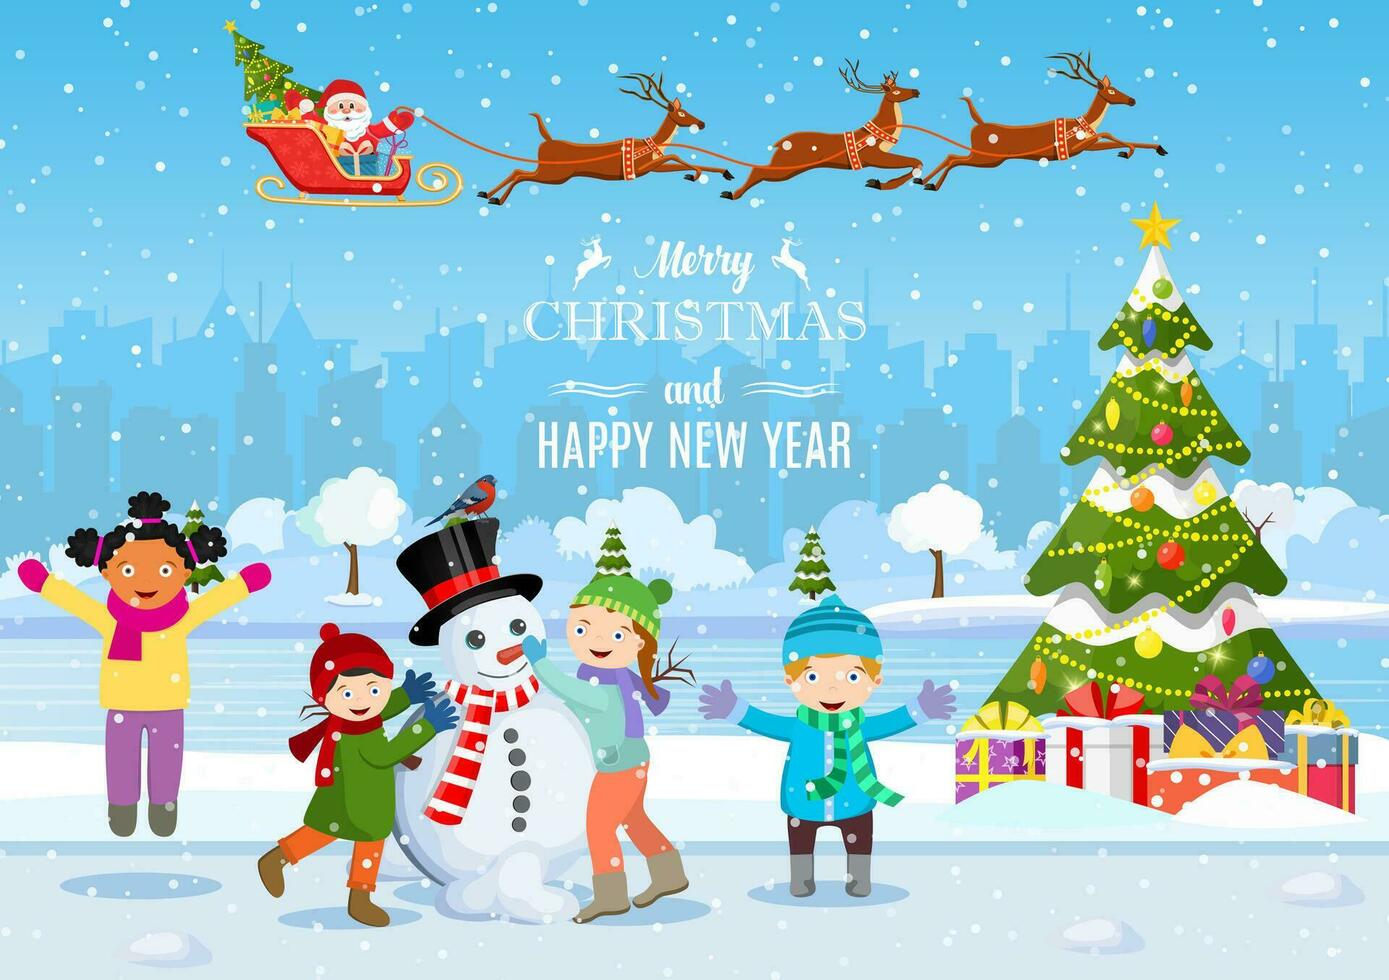 happy new year and merry Christmas greeting card. Christmas landscape. christmas tree. Children building snowman. Winter holidays. Vector illustration in flat style